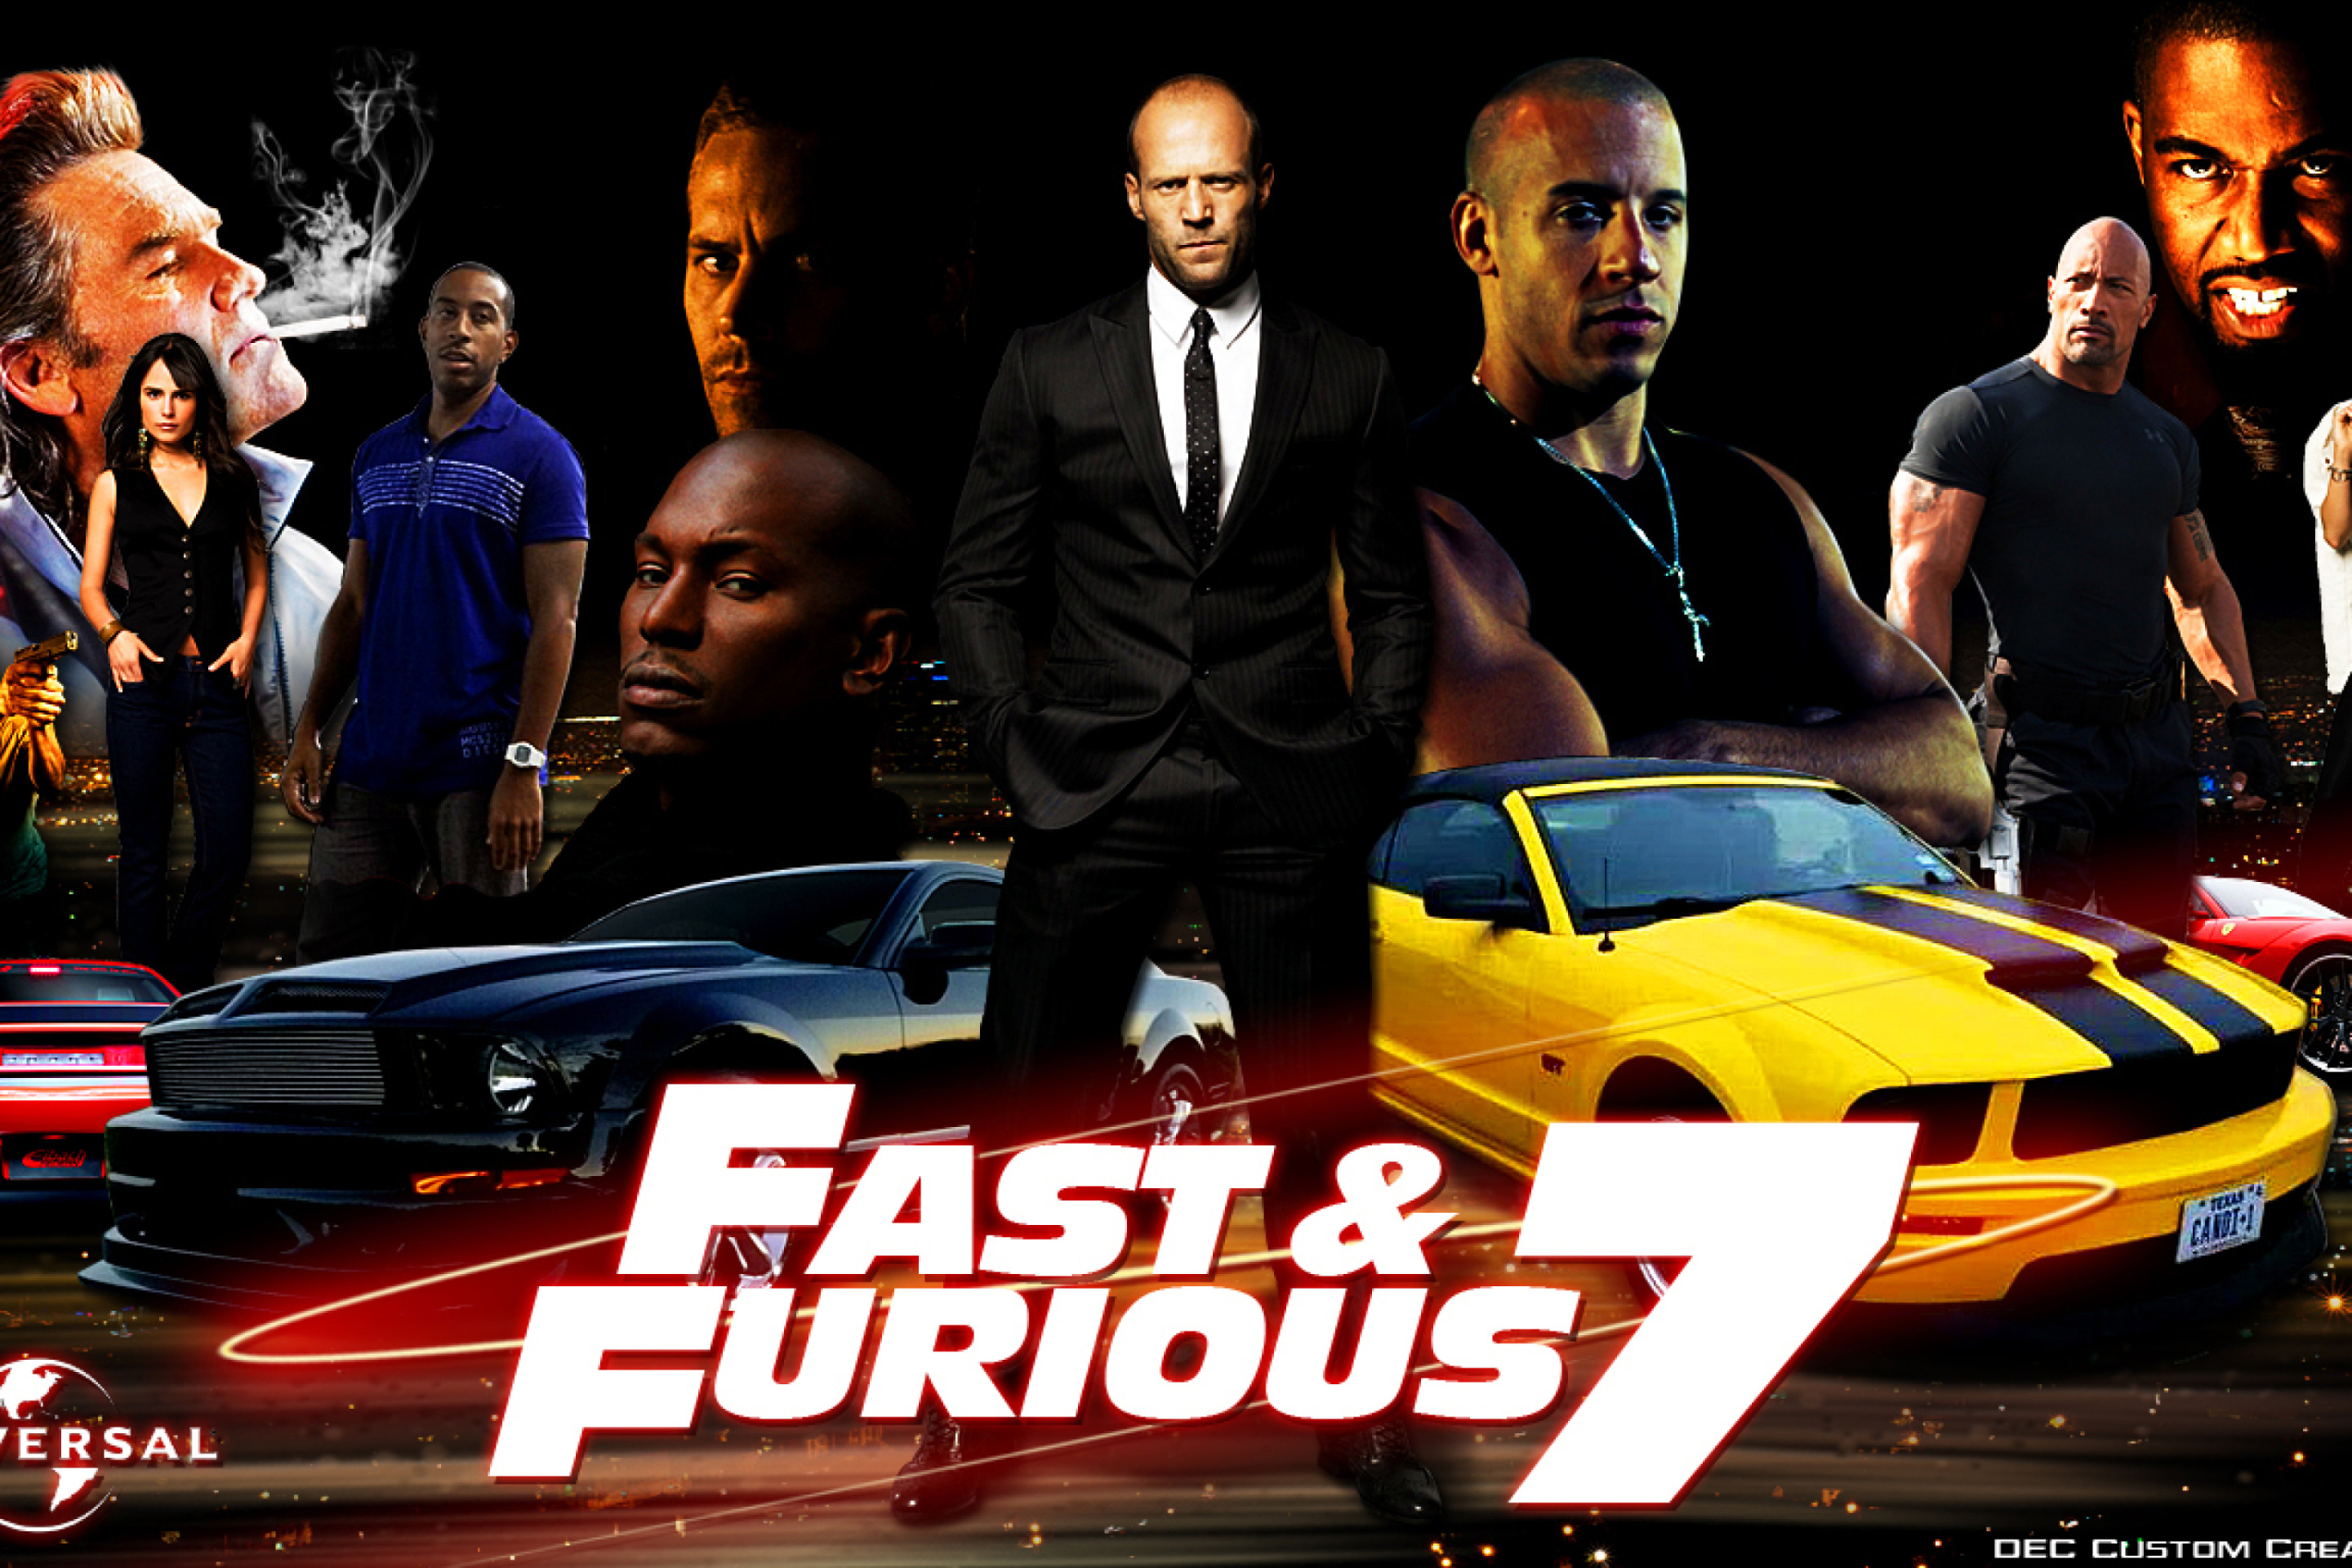 Fast and Furious 7 Movie wallpaper 2880x1920